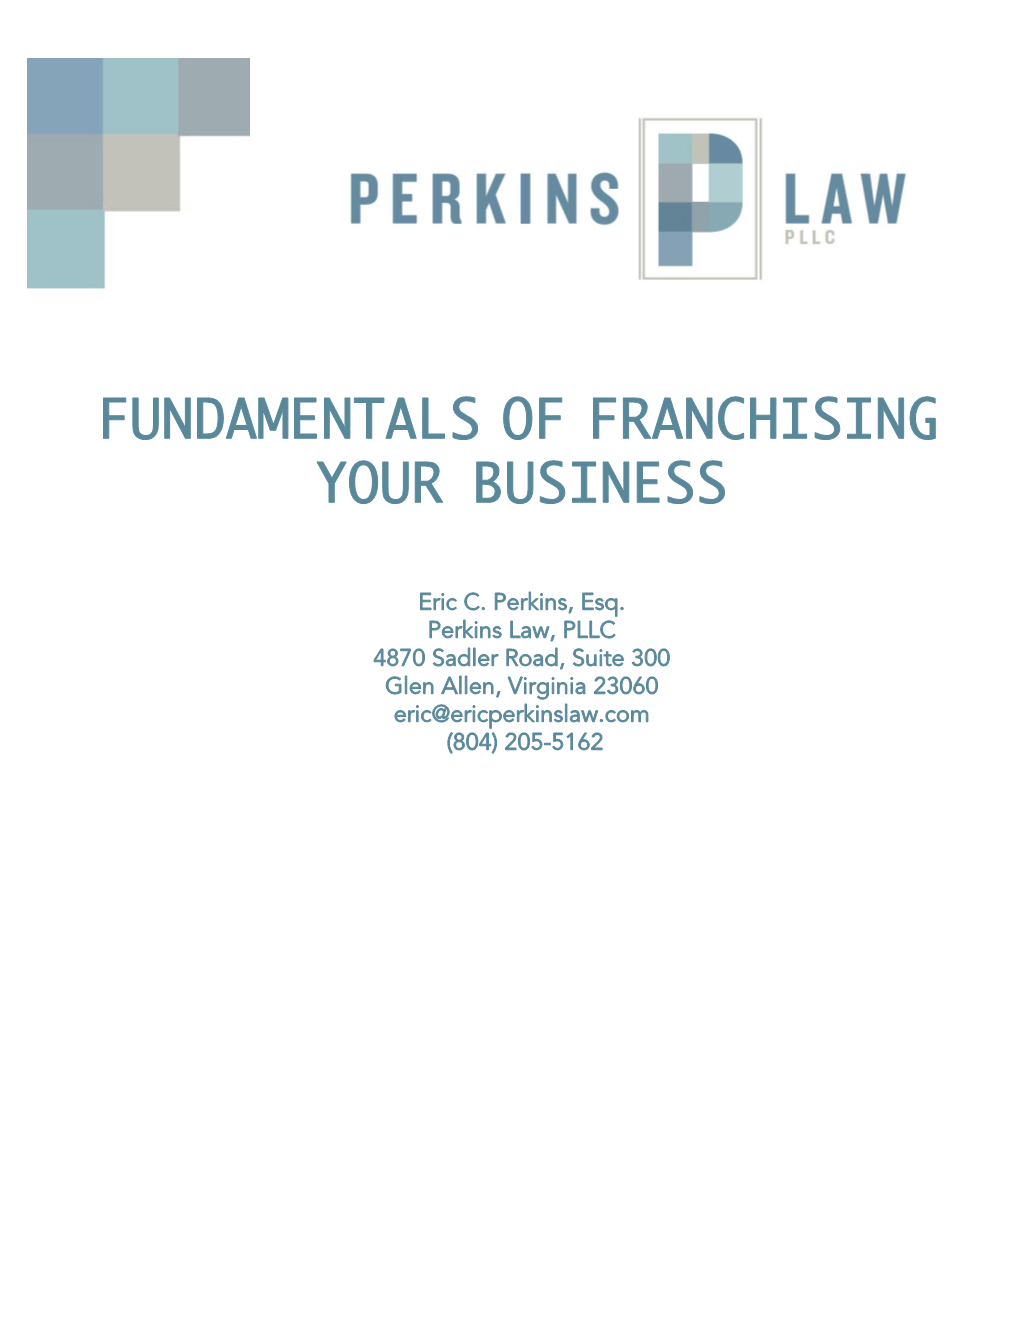 Fundamentals of Franchising Your Business